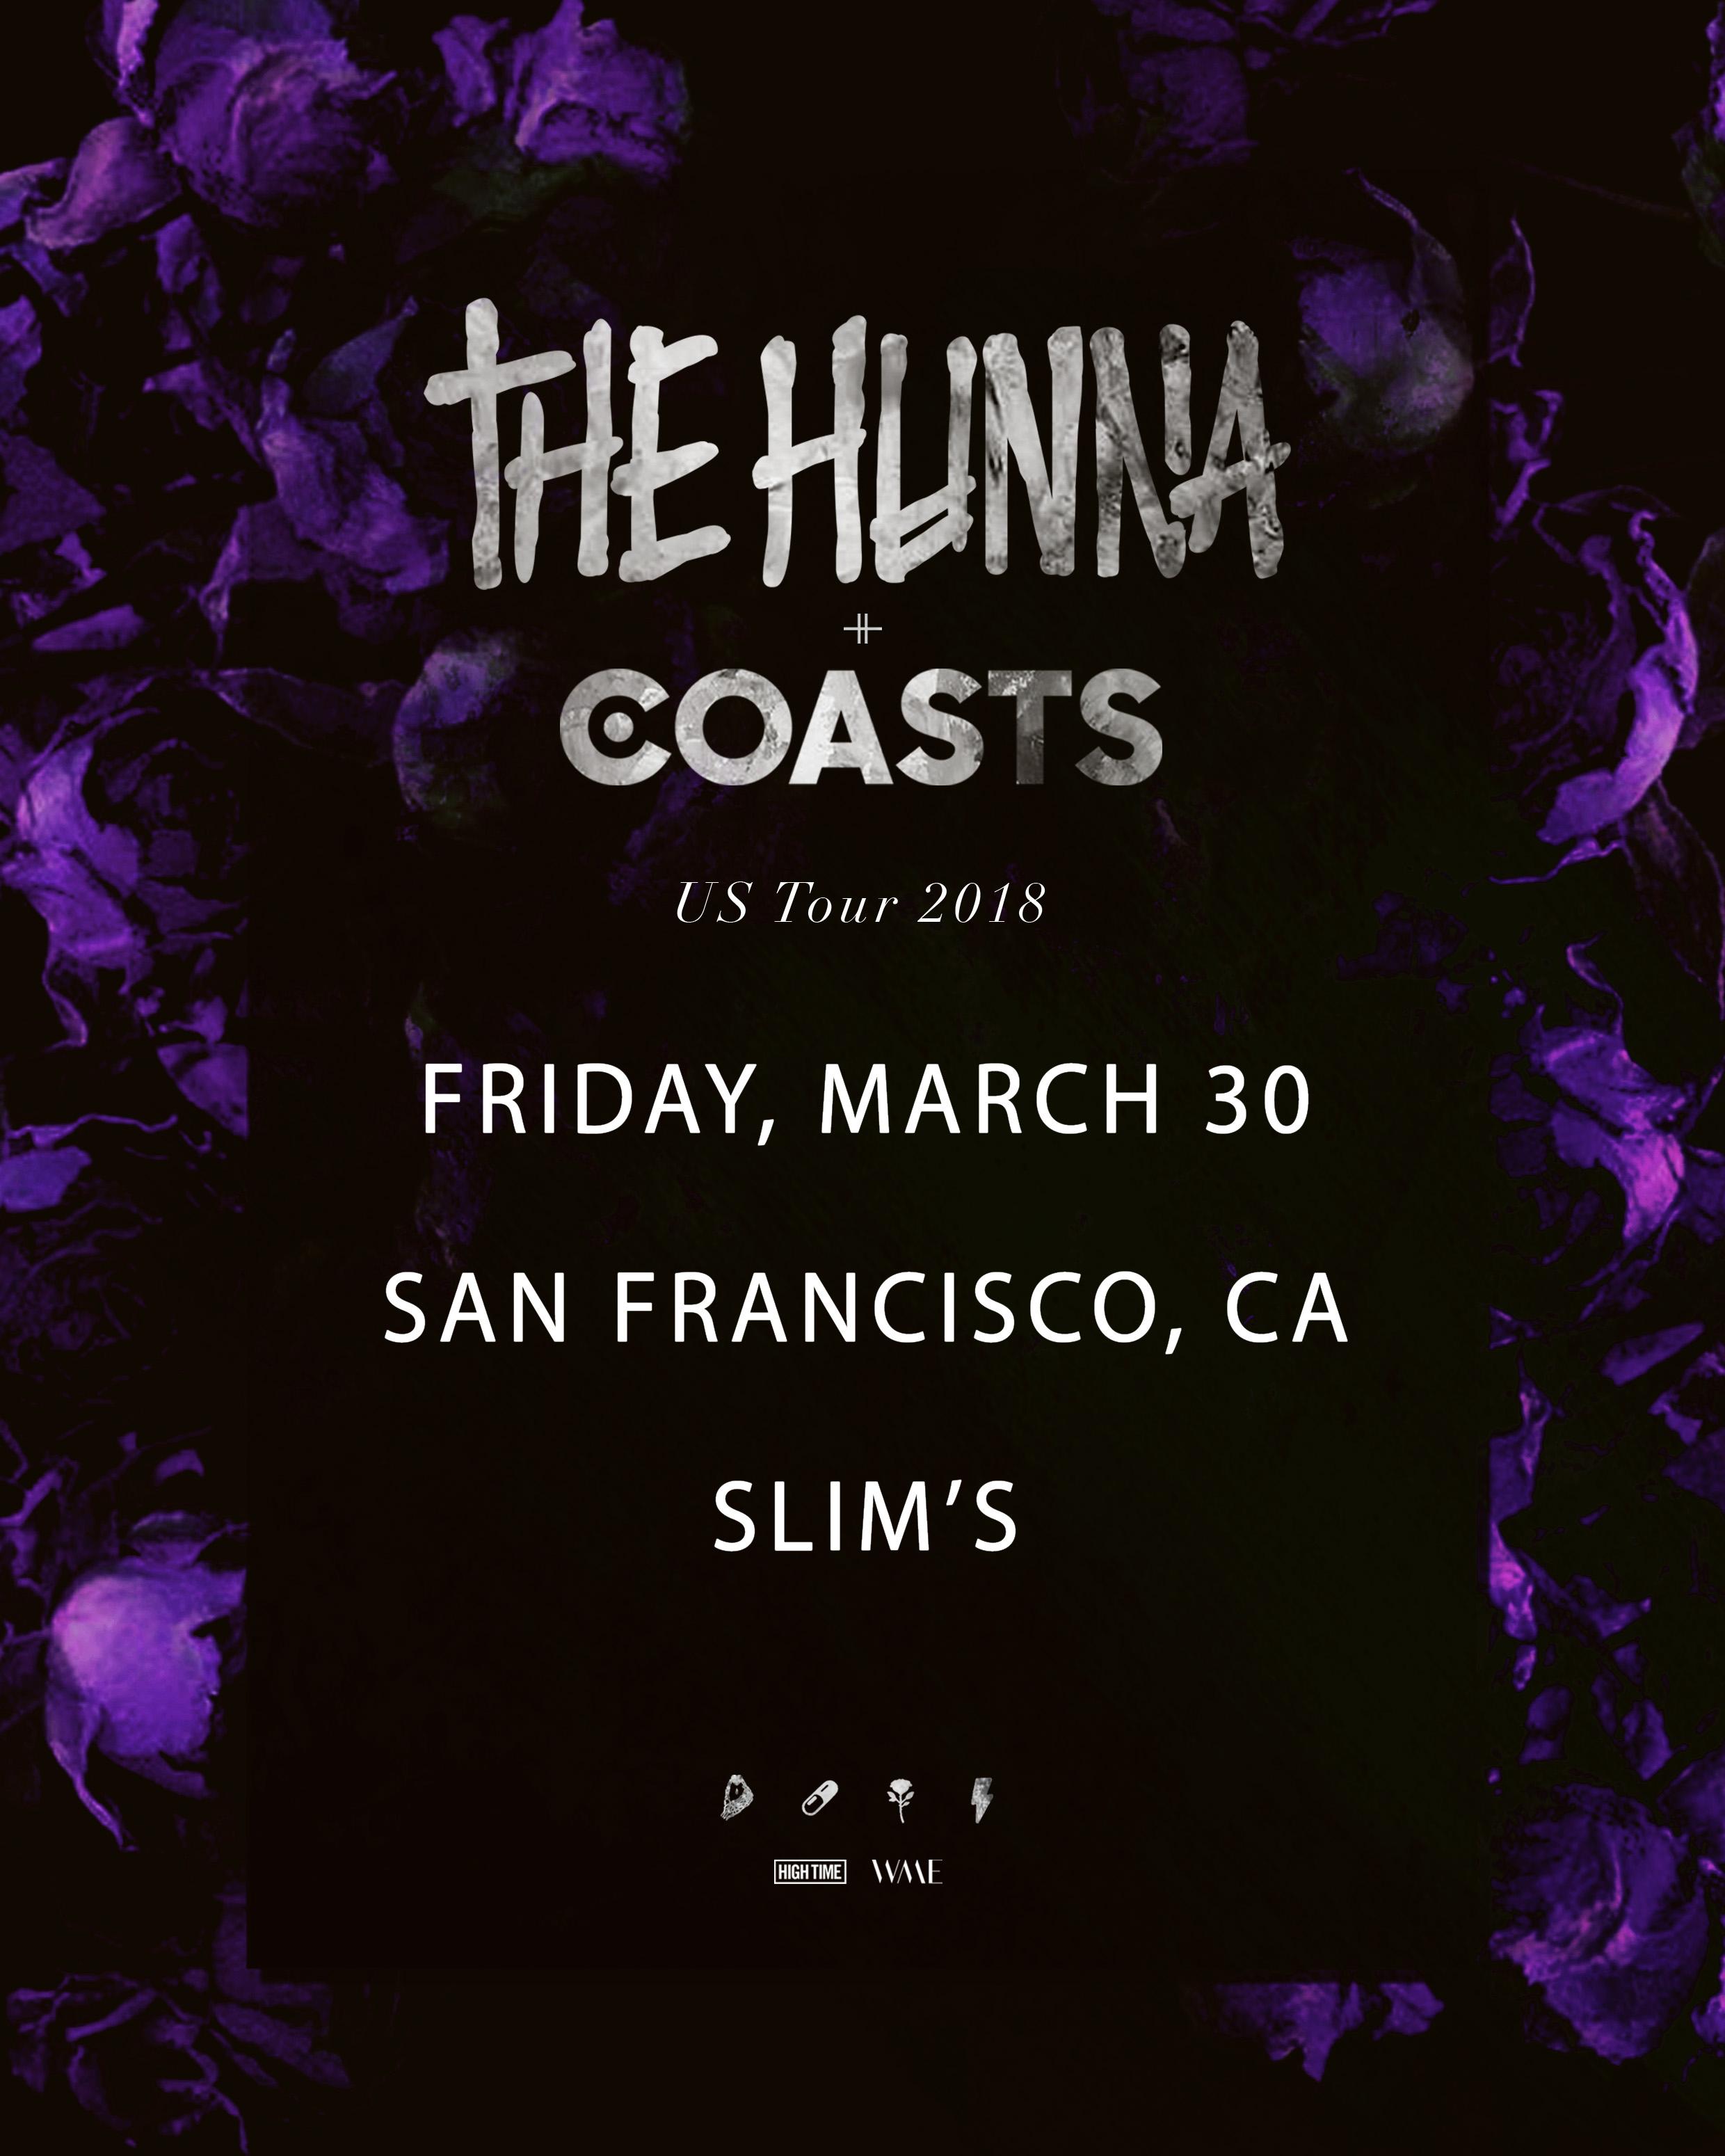 The Hunna and Coasts - High Time Live @ Slim's w/ courtship.